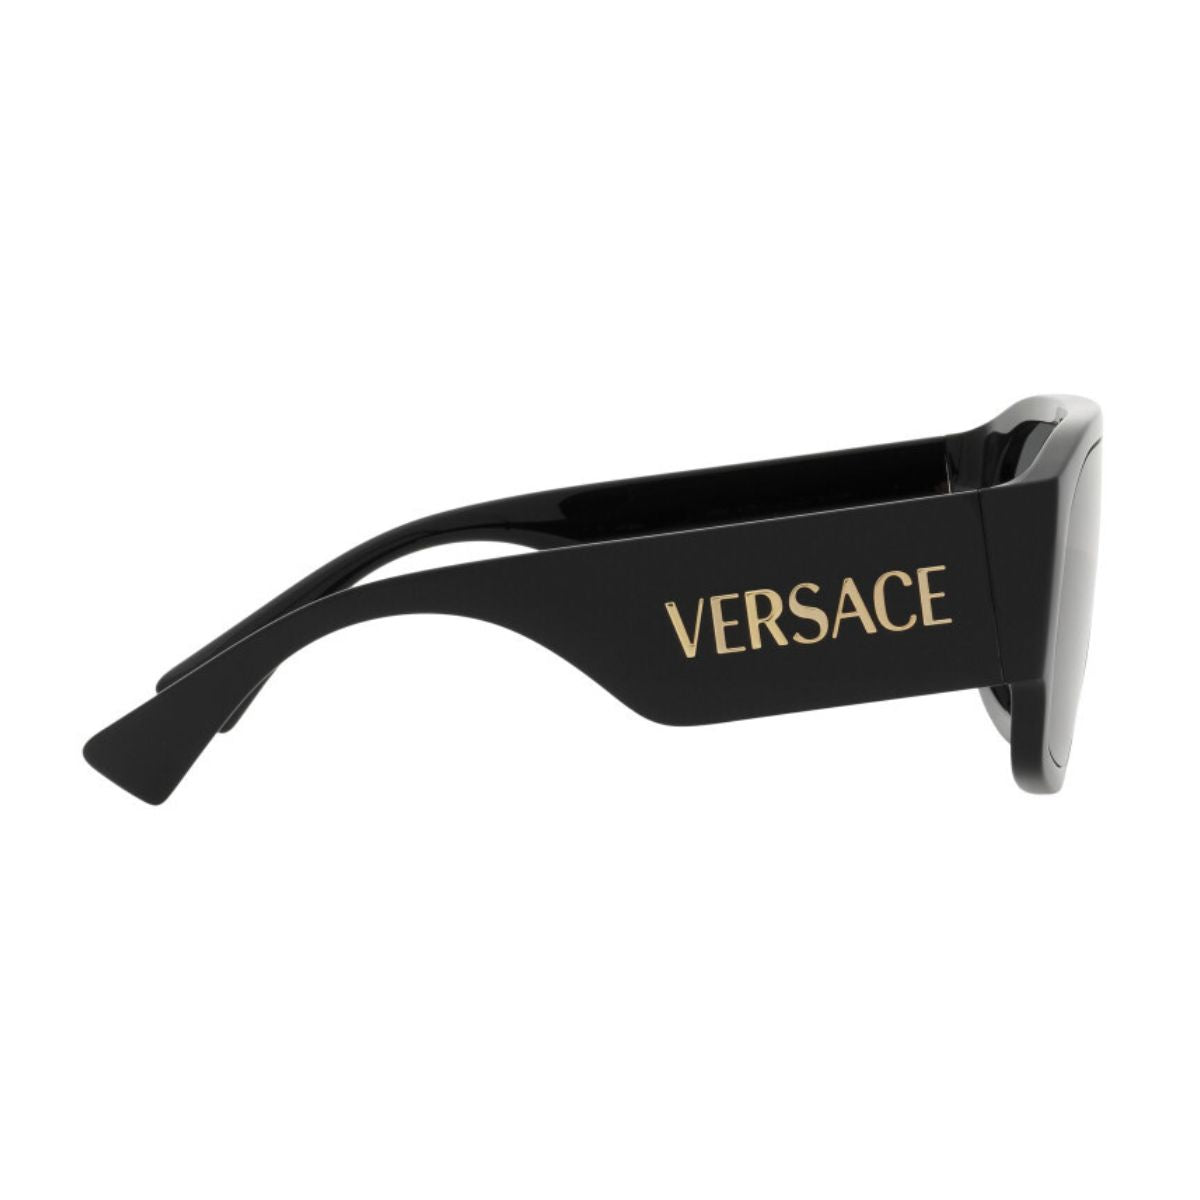 "Shop Versace 4439 GB1/87 UV Protection Modern Sunglasses For Men And Women At Optorium"